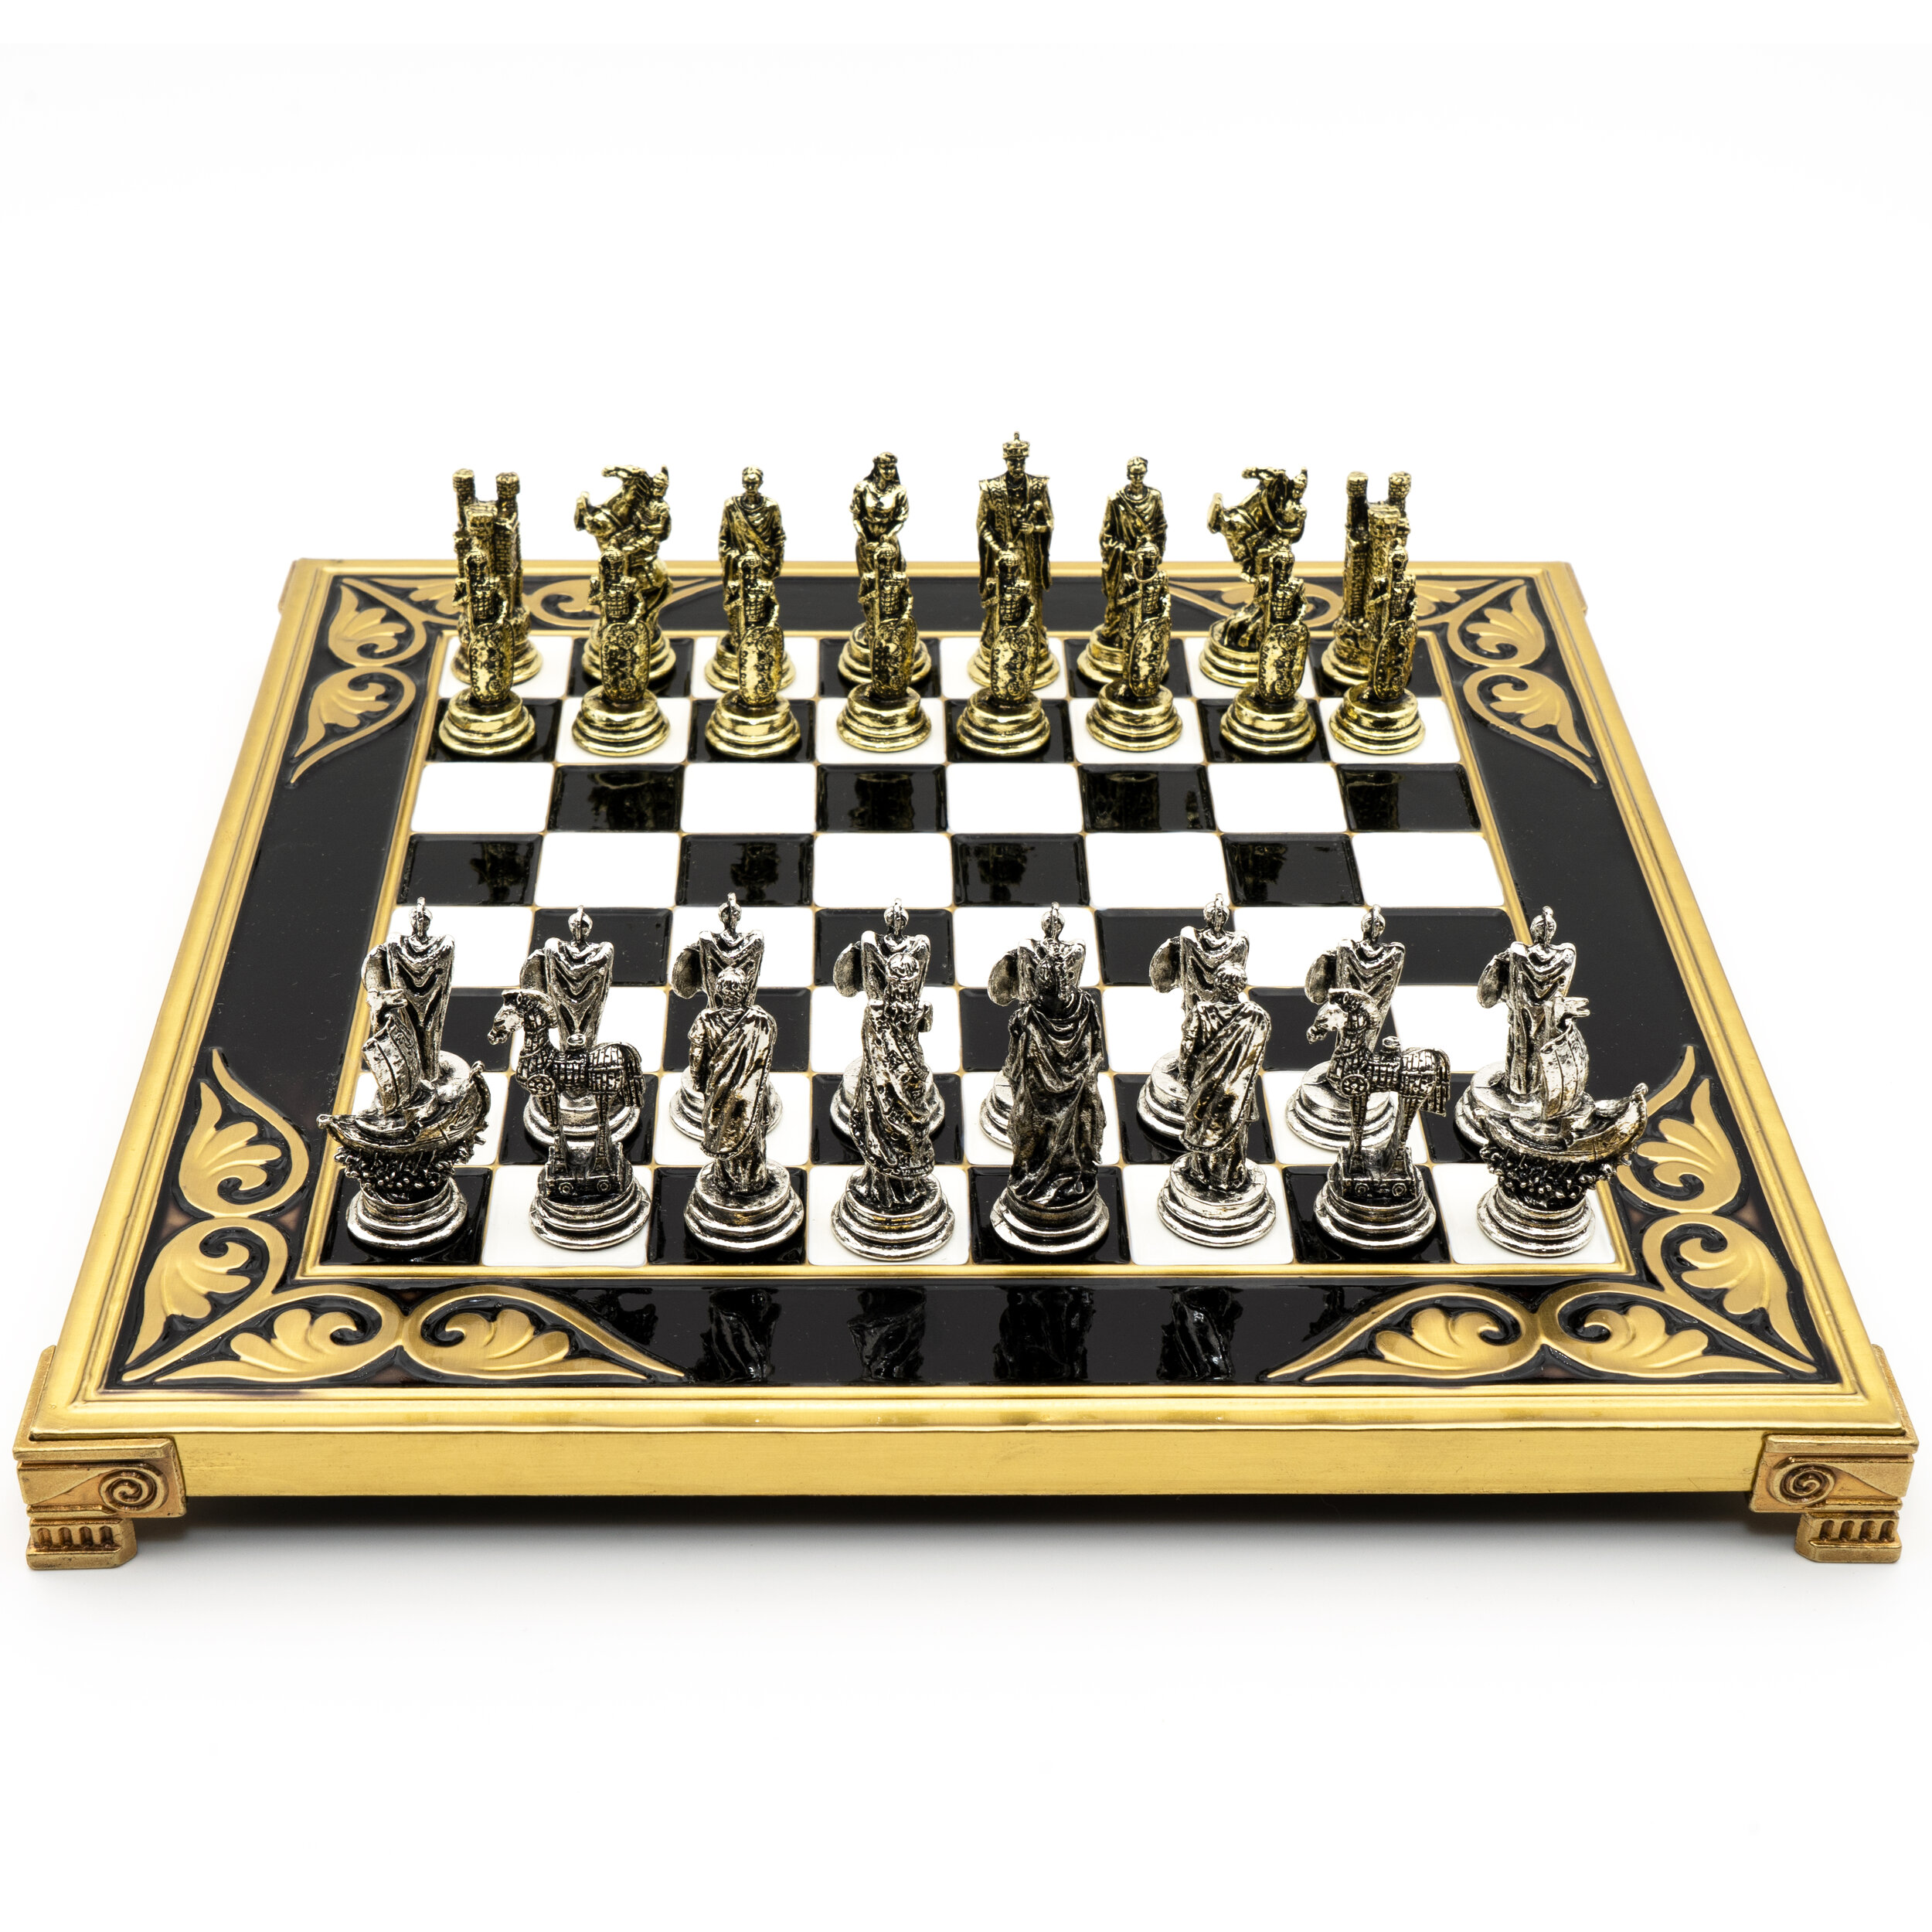 Puzzle Box Wooden Chess Set with Trojan War metal chess pieces Handmade Wood Art 